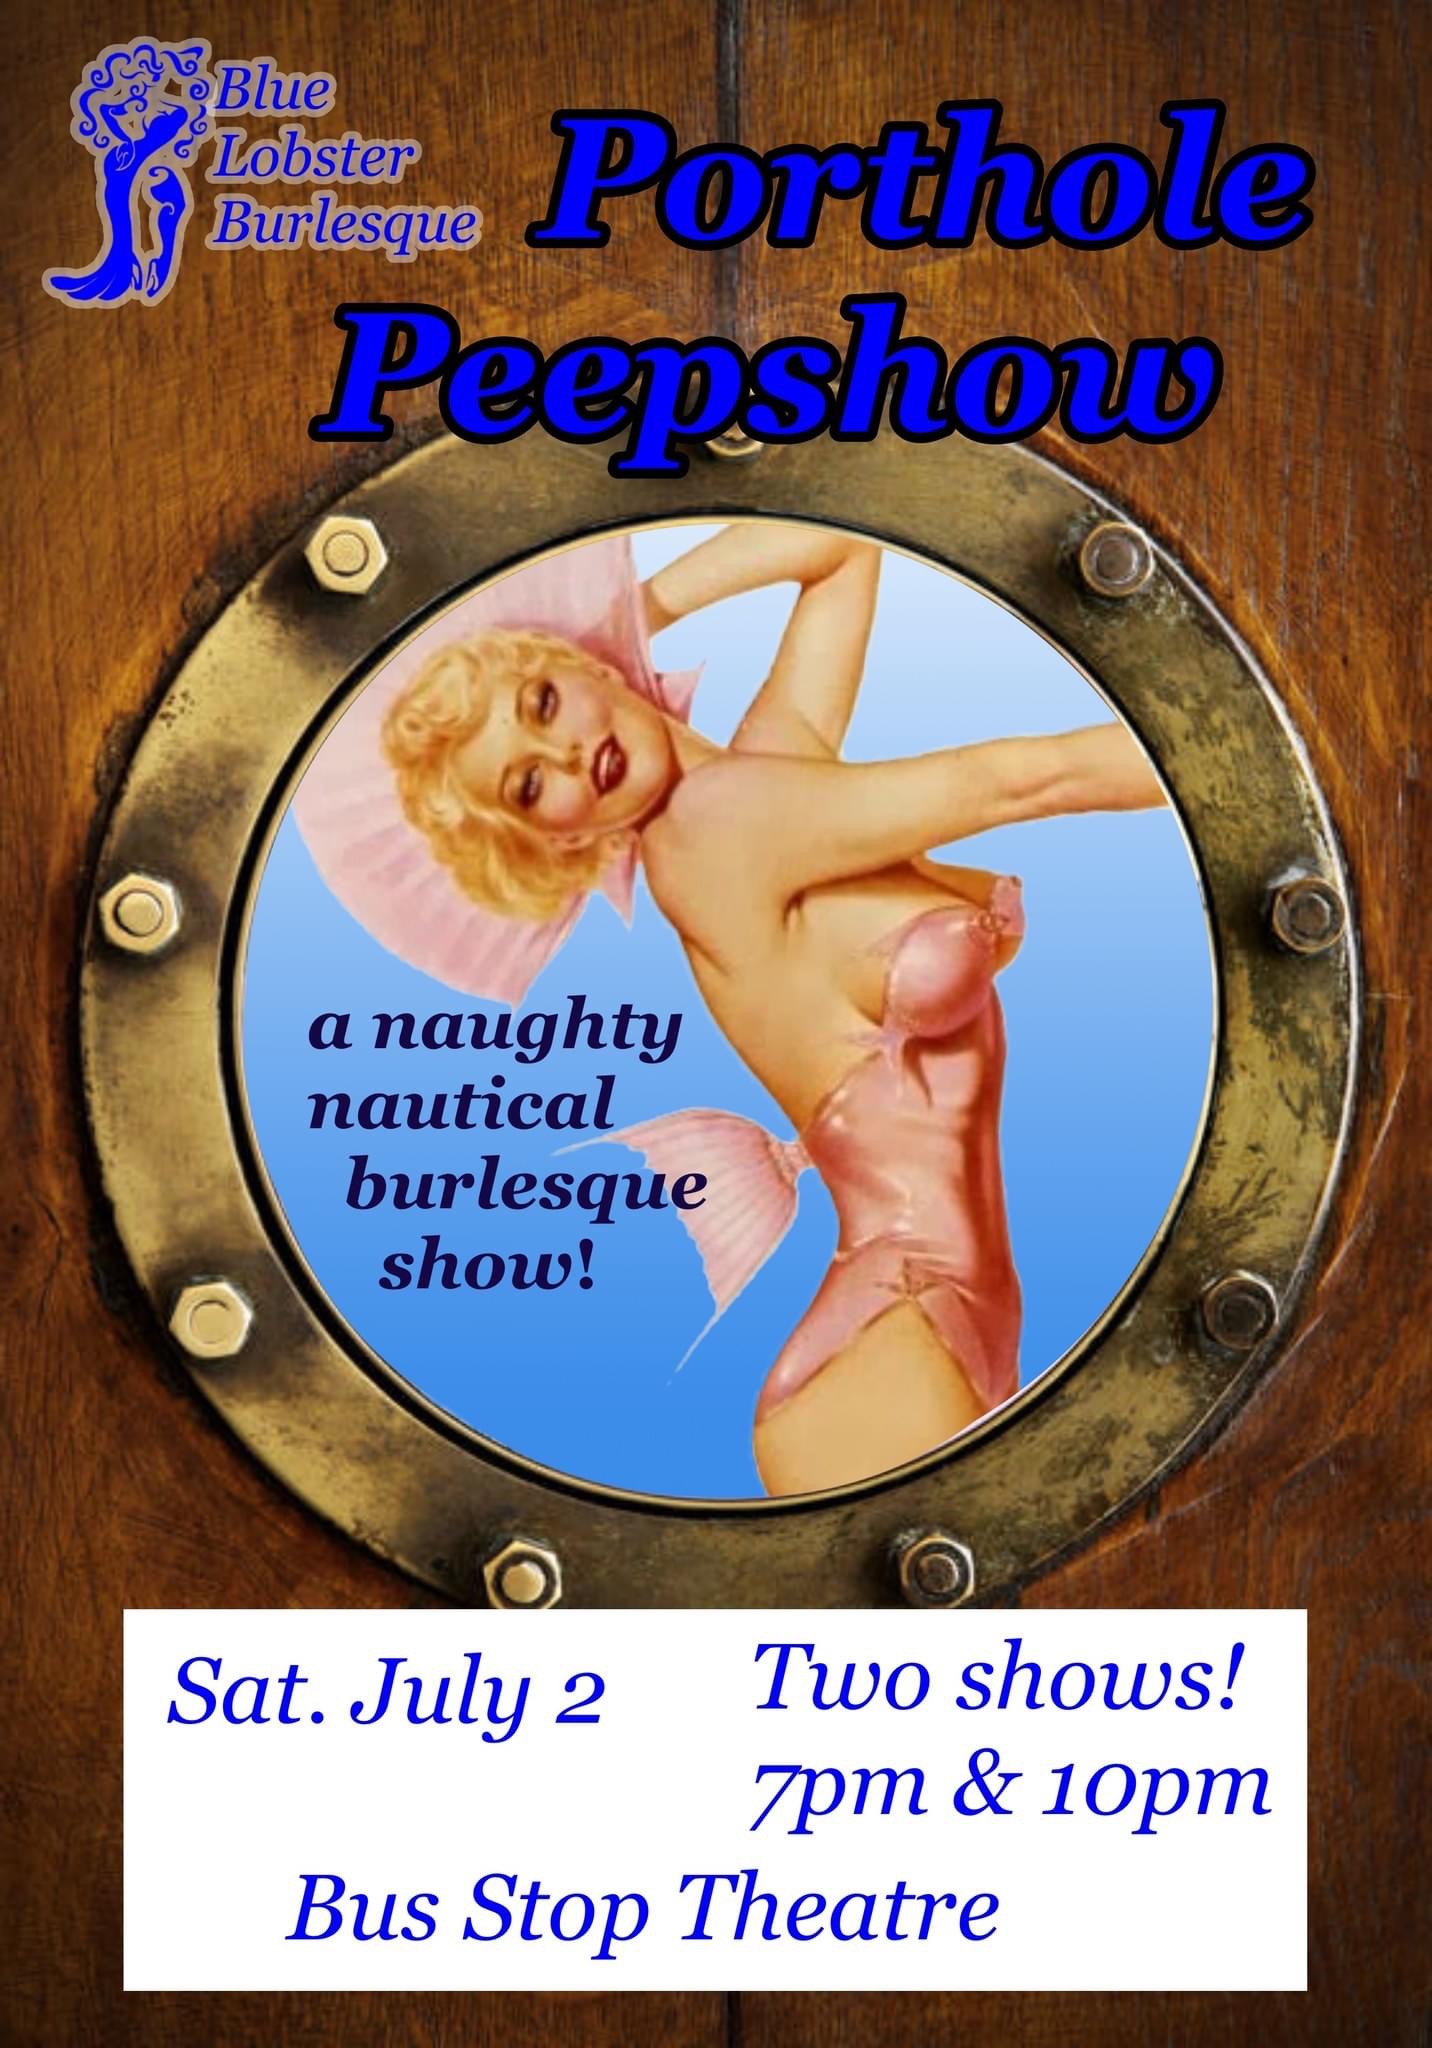 Blue Lobster Burlesque poster for Porthole Peepshow. Event text on the poster is listed on the event.